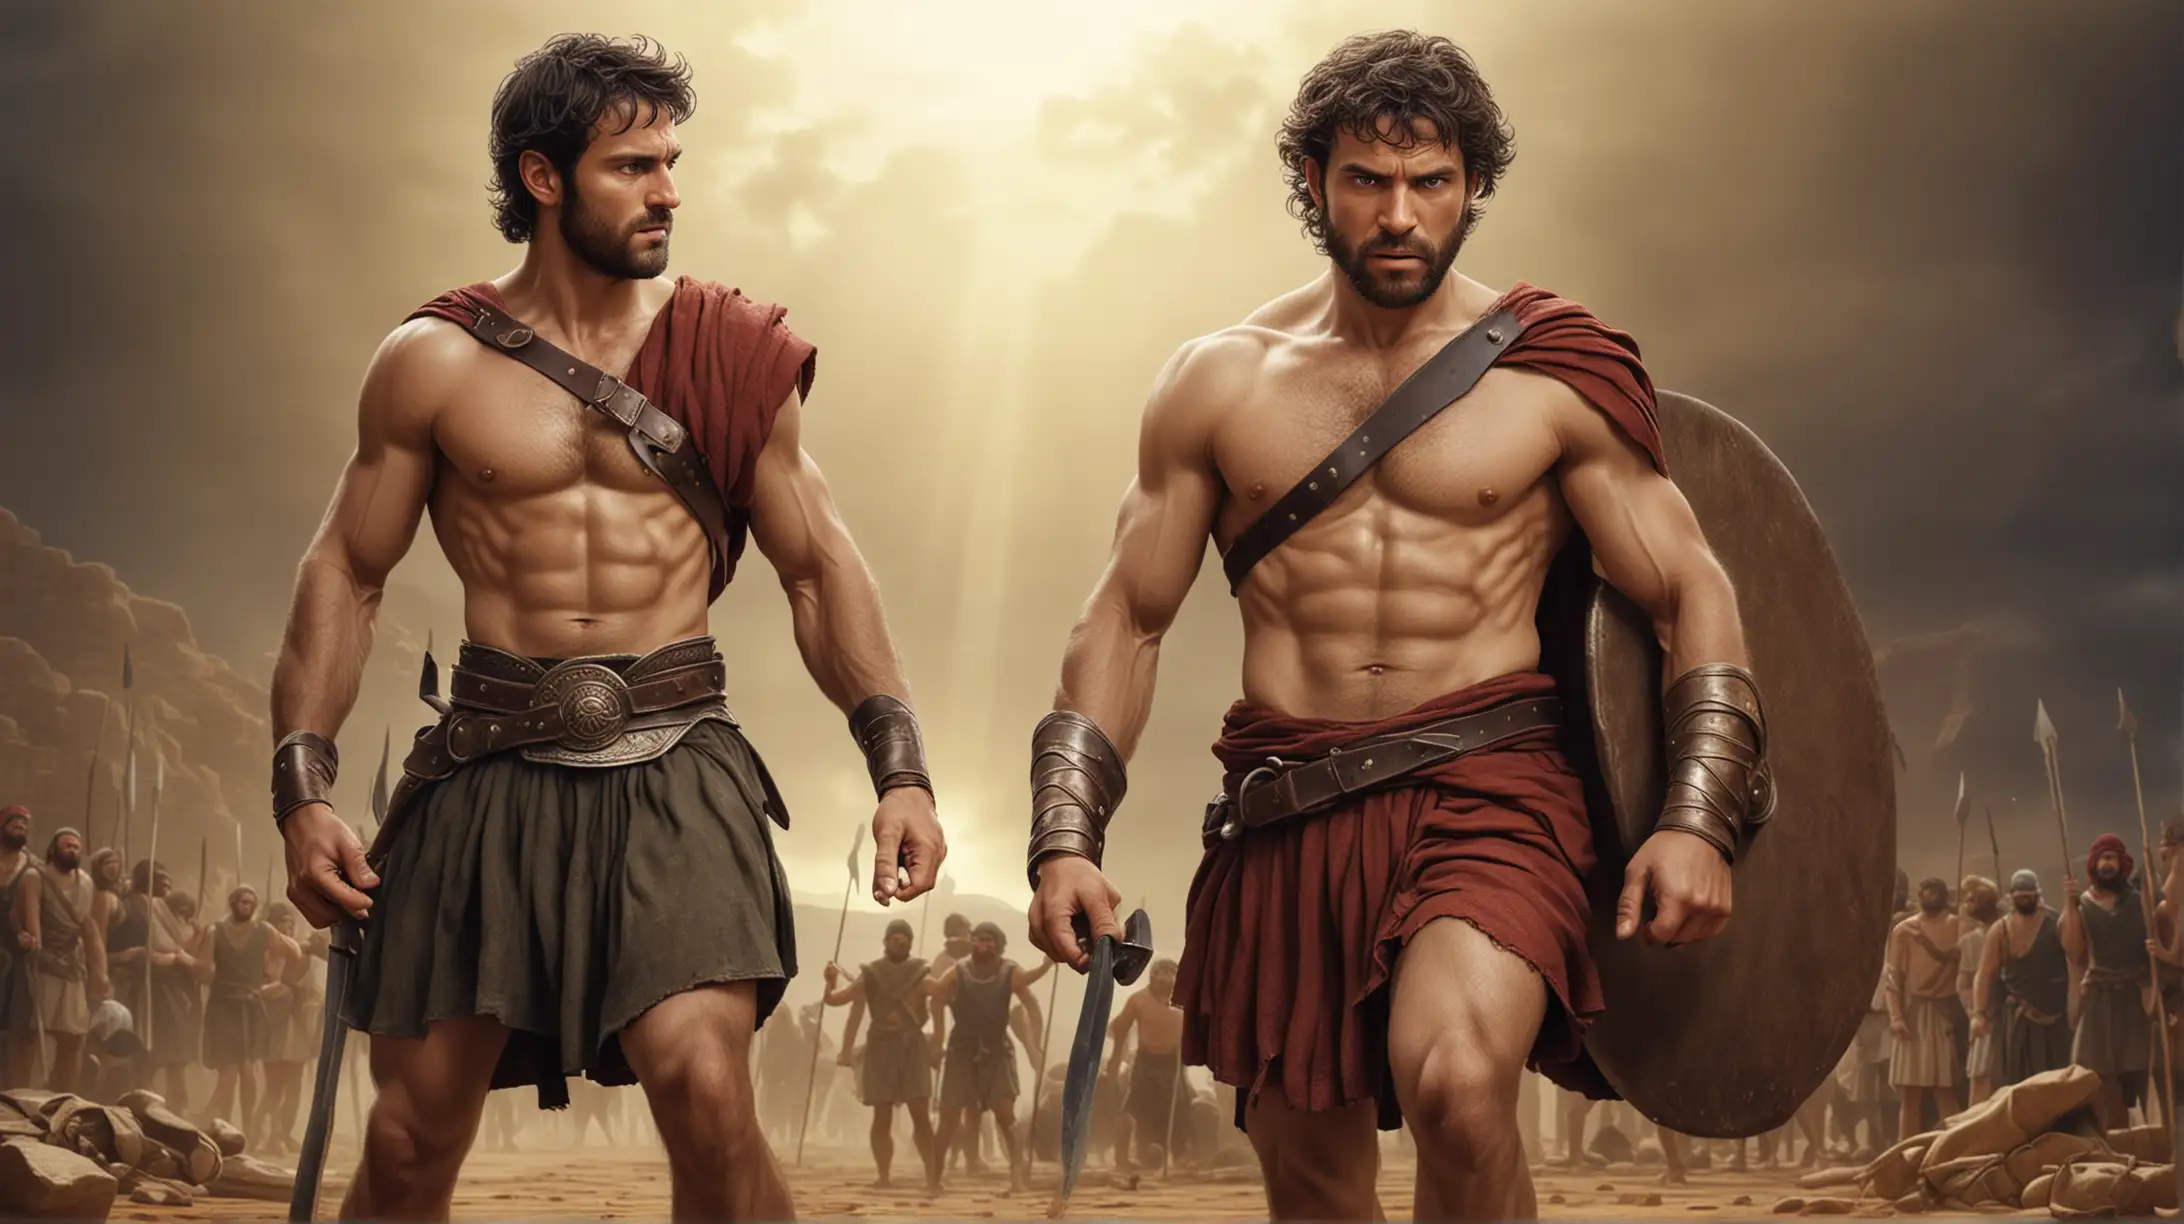 David Confronts Goliath Epic Biblical Encounter Captured in Stunning Realism